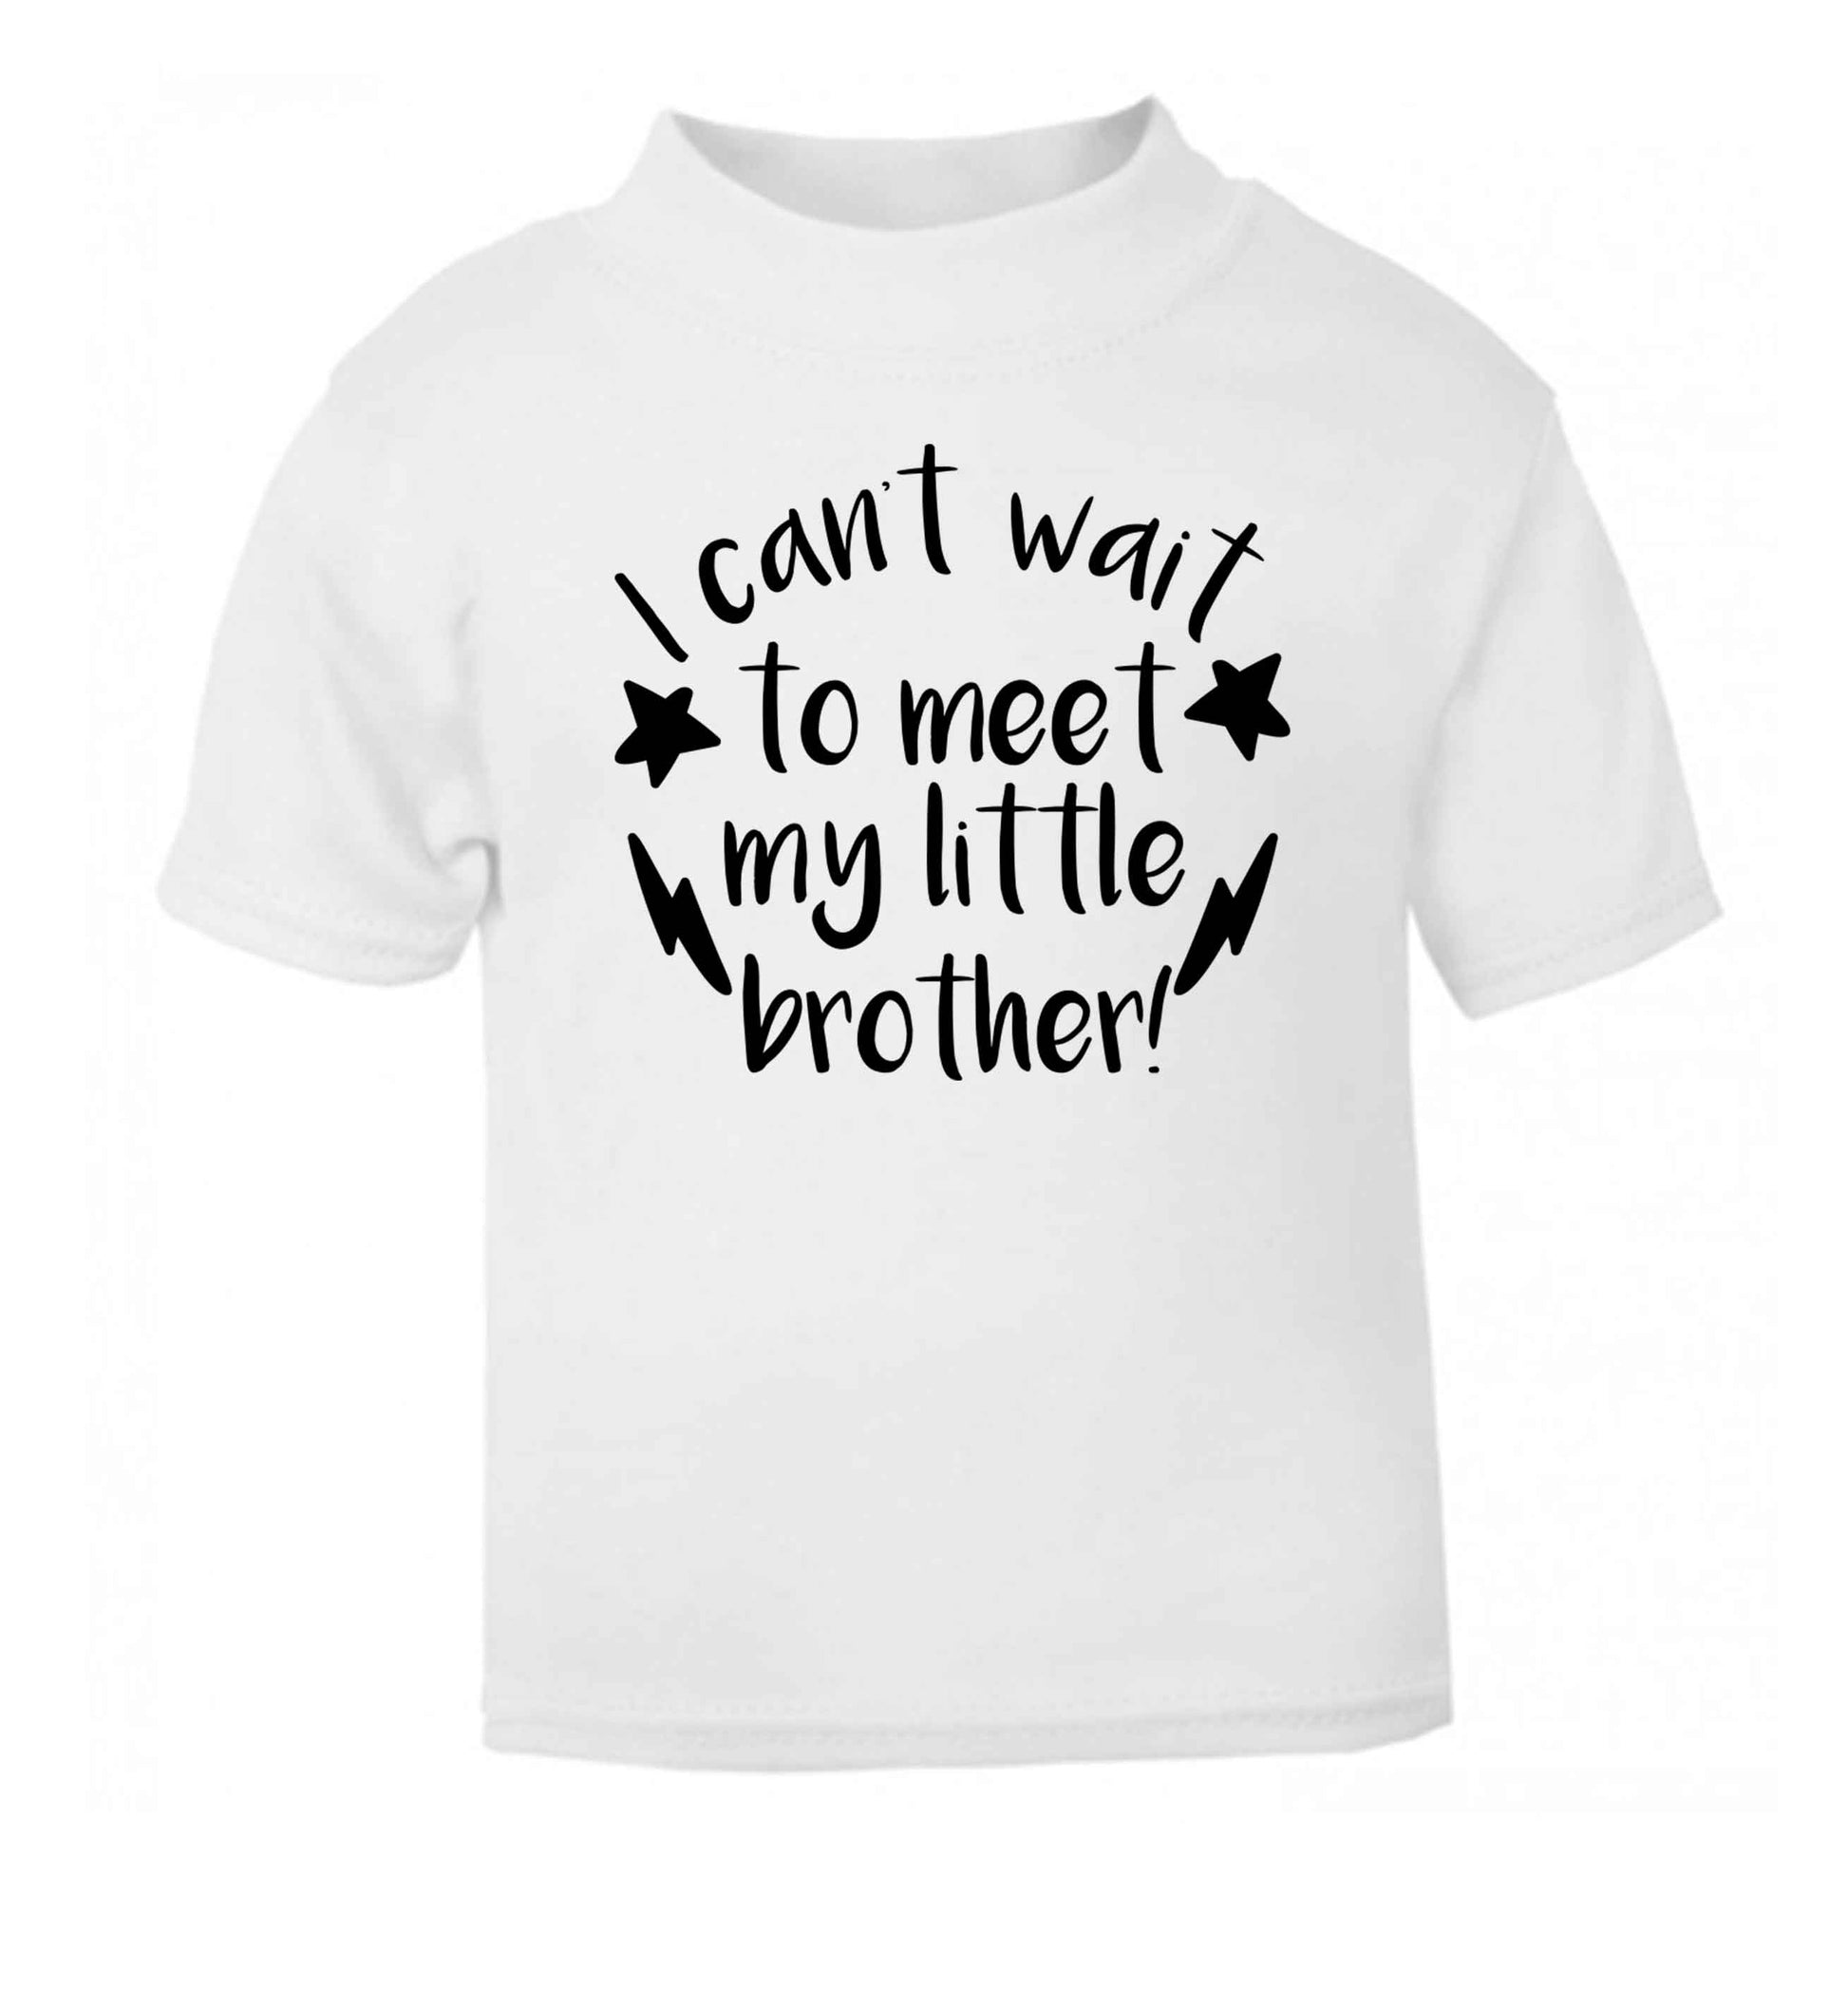 I can't wait to meet my sister! white Baby Toddler Tshirt 2 Years